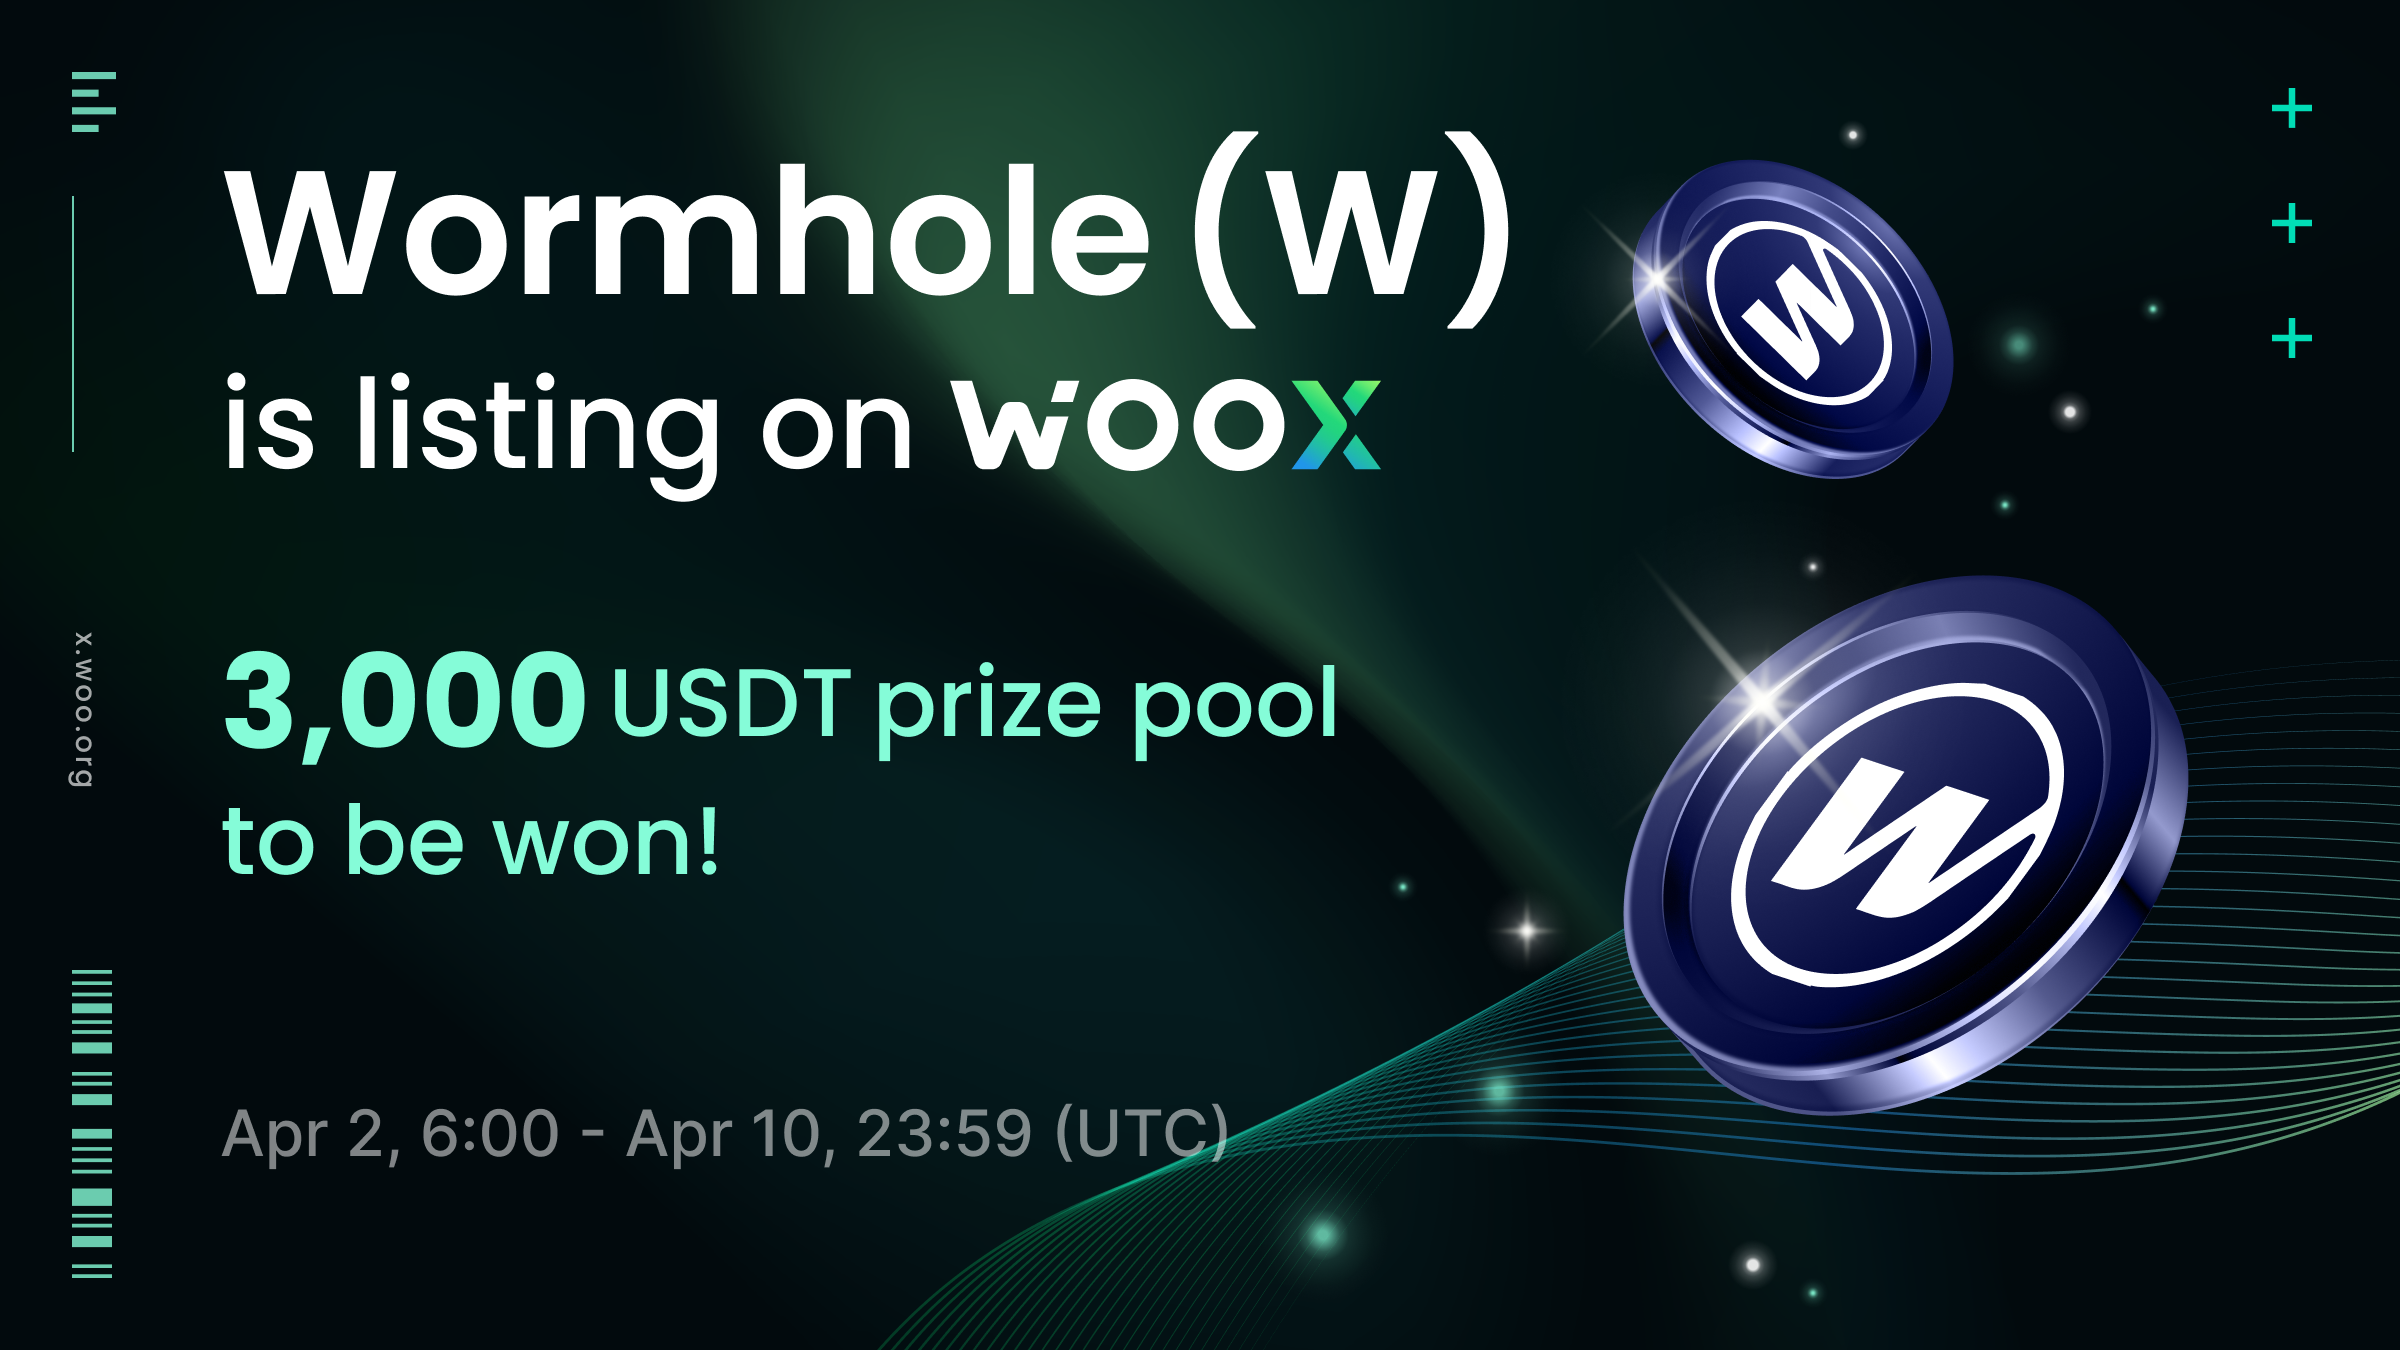 New Listing: Wormhole (W) on WOO X - Trade and share a 3,000 USDT prize pool!